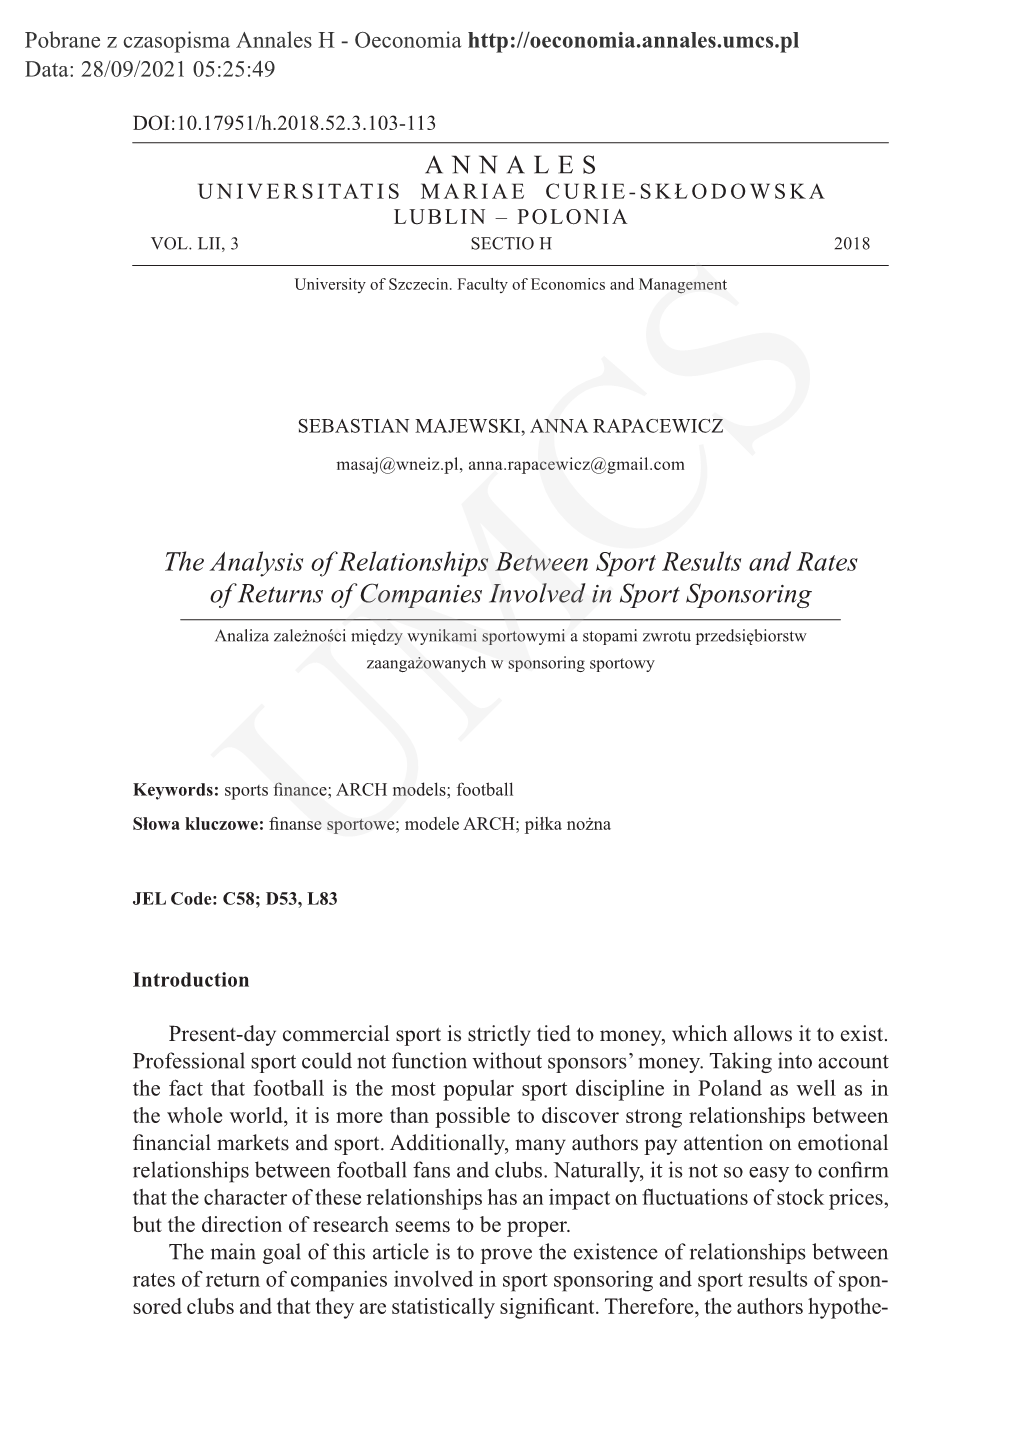 The Analysis of Relationships Between Sport Results and Rates of Returns of Companies Involved in Sport Sponsoring